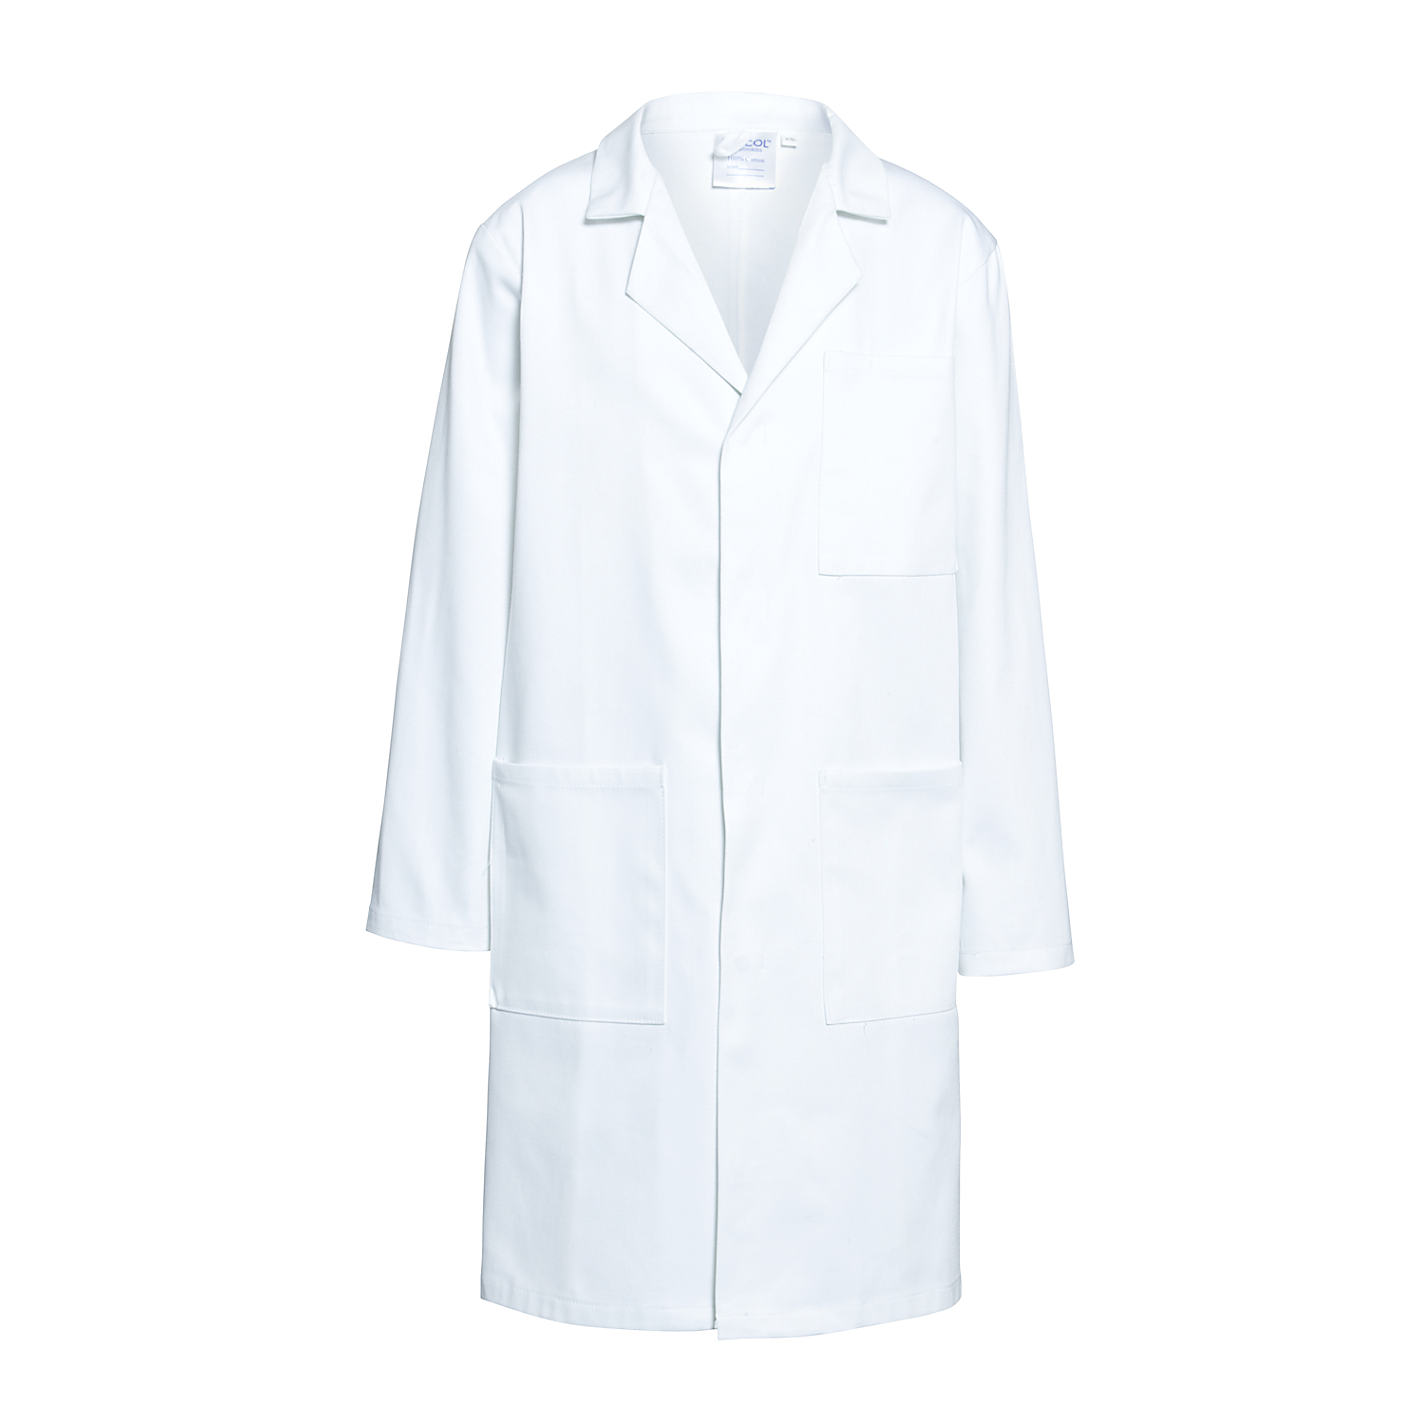 Images of Where To Buy A Lab Coat - Reikian